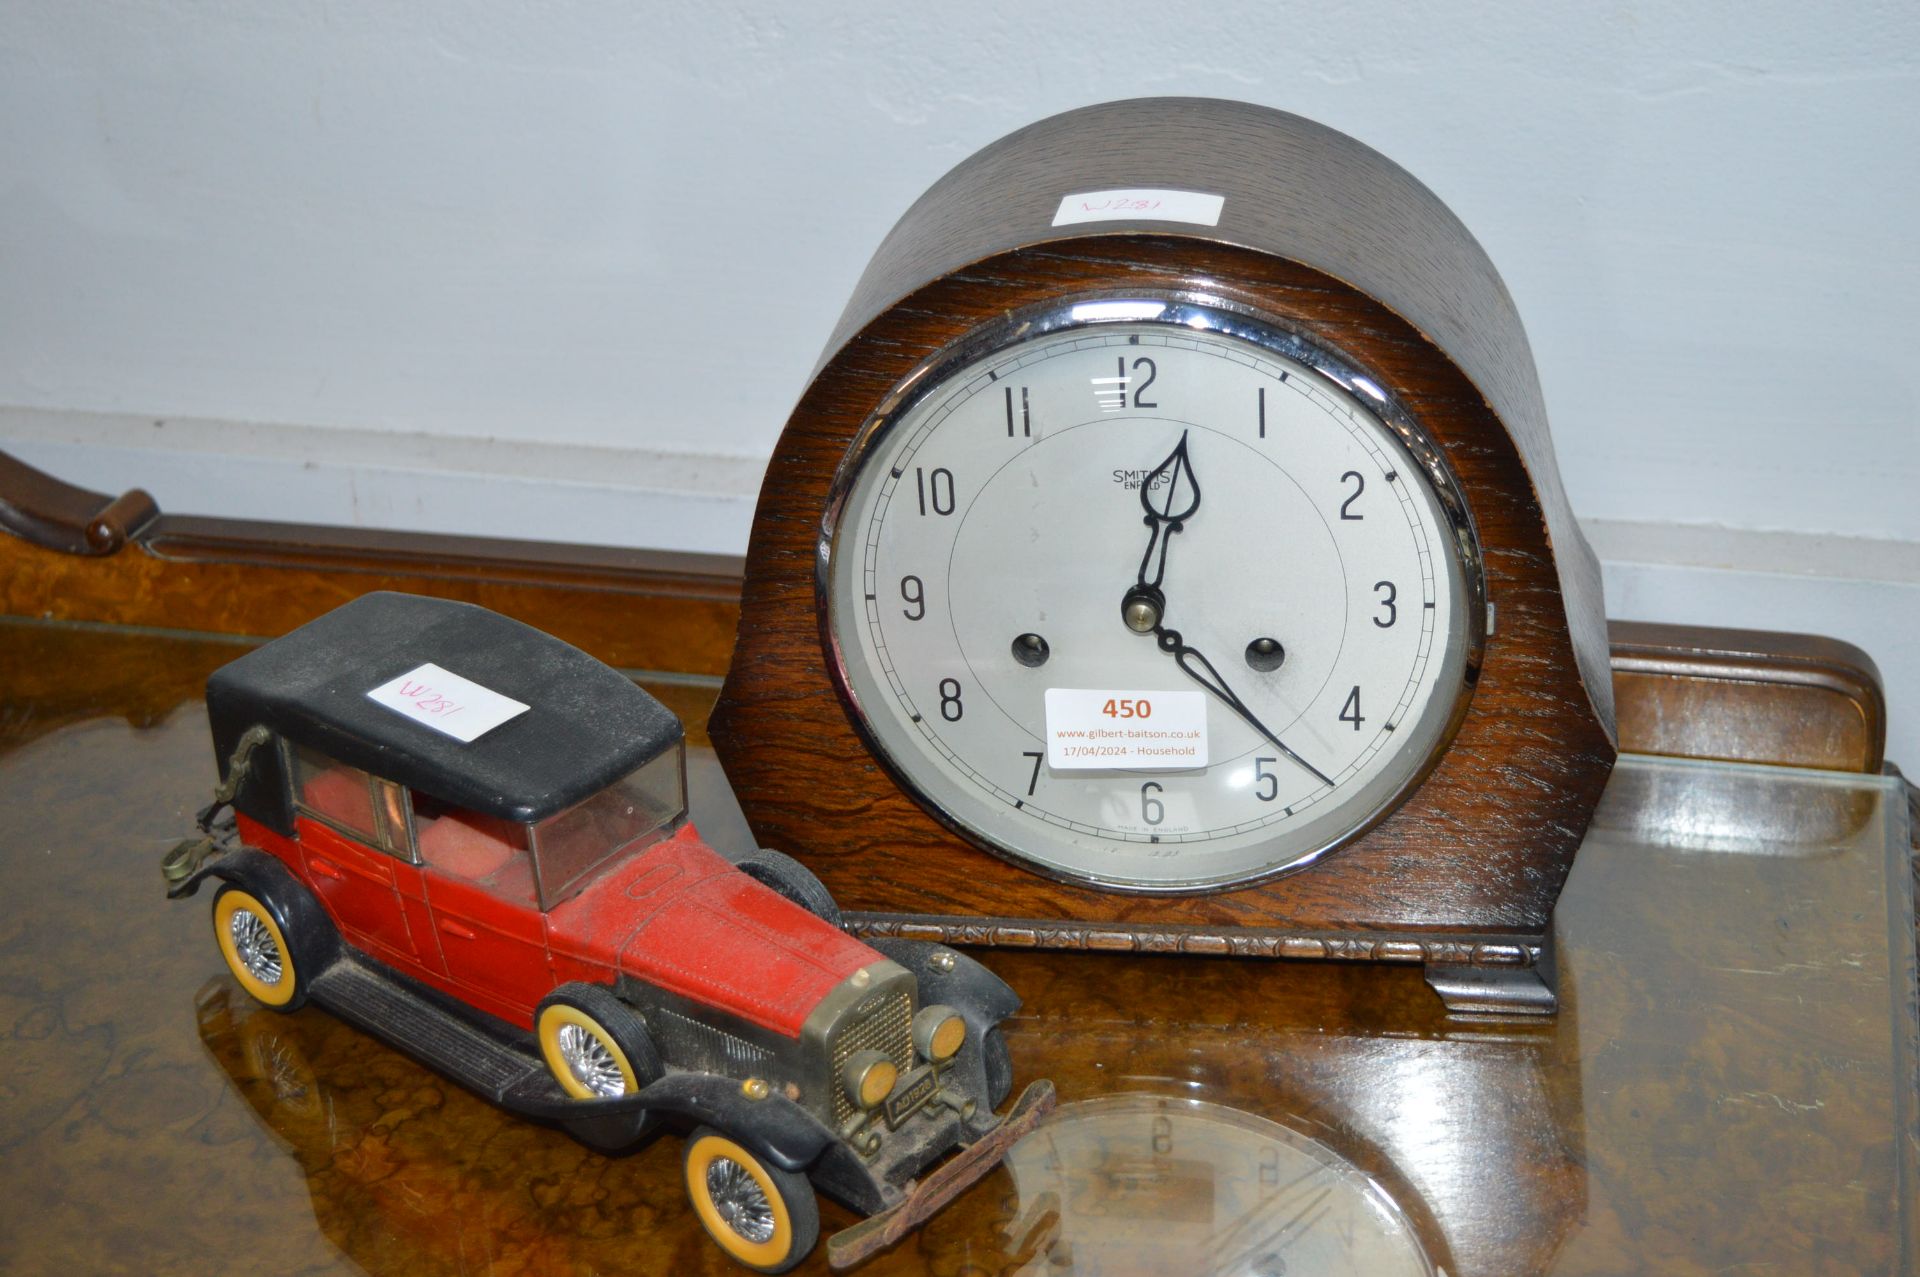 1930's Mantel Clock and a Model Toy Car